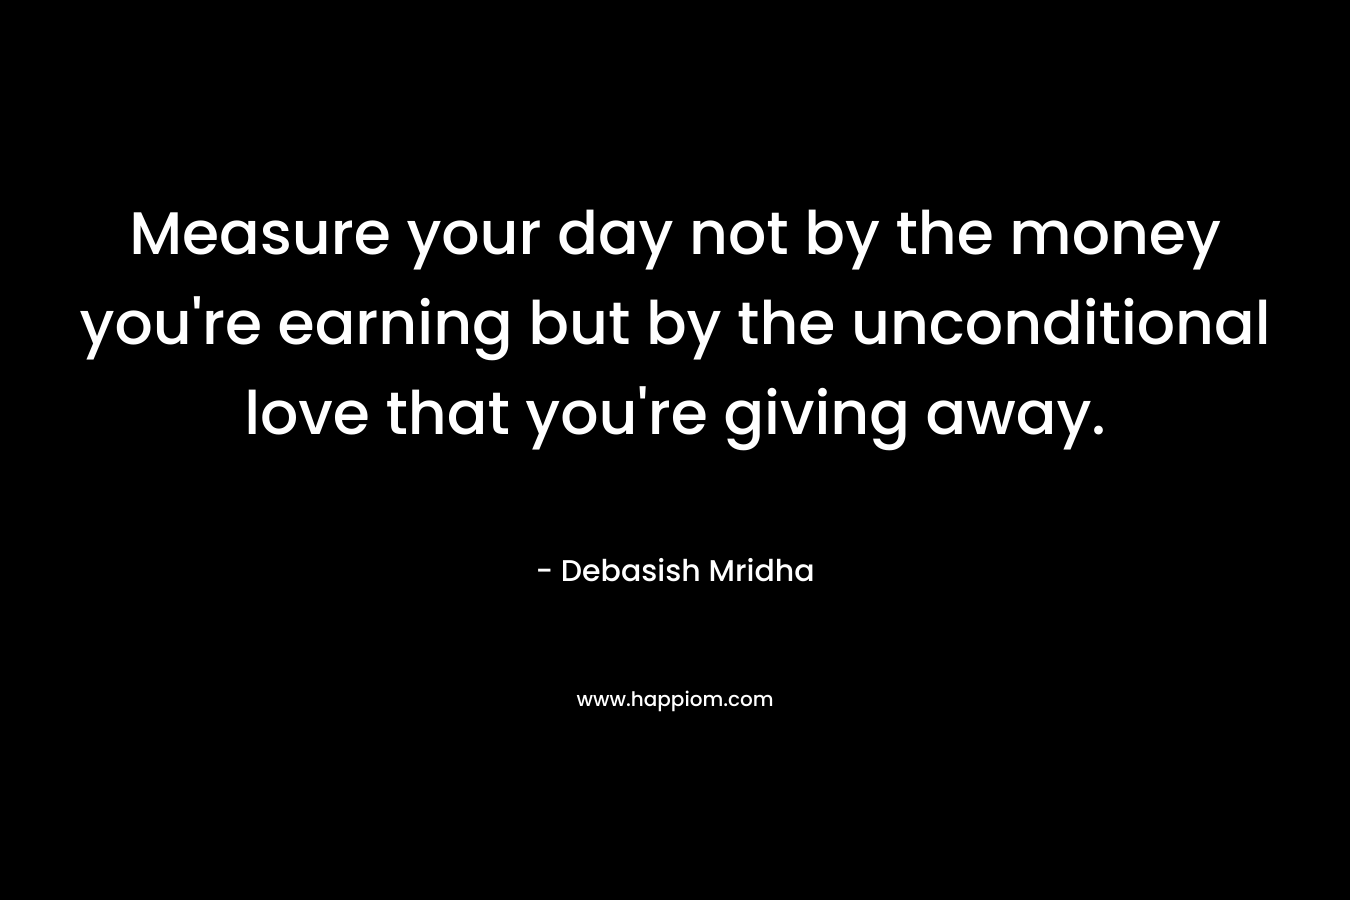 Measure your day not by the money you’re earning but by the unconditional love that you’re giving away. – Debasish Mridha